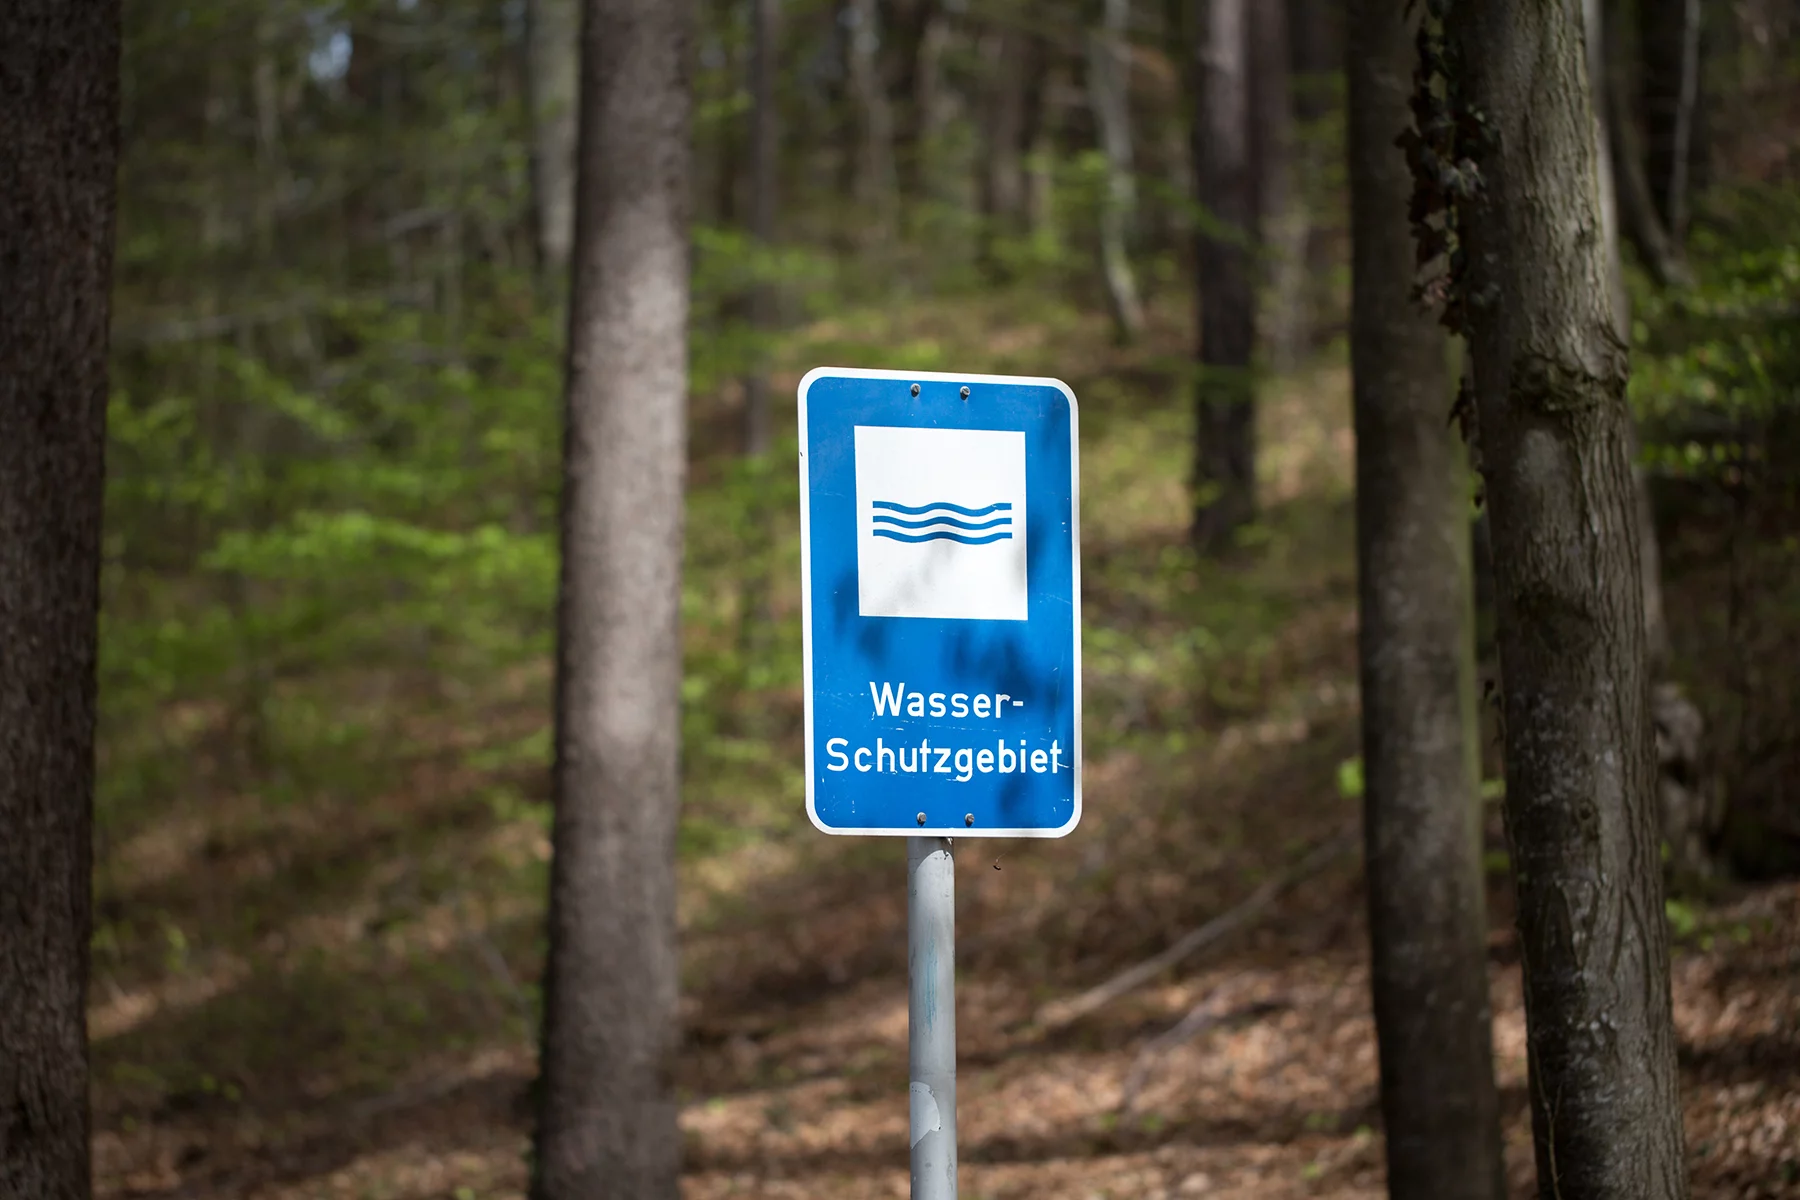 A sign in Bavaria, Germany denoting a Wasserschutzgebiet, or an area used for drinking water